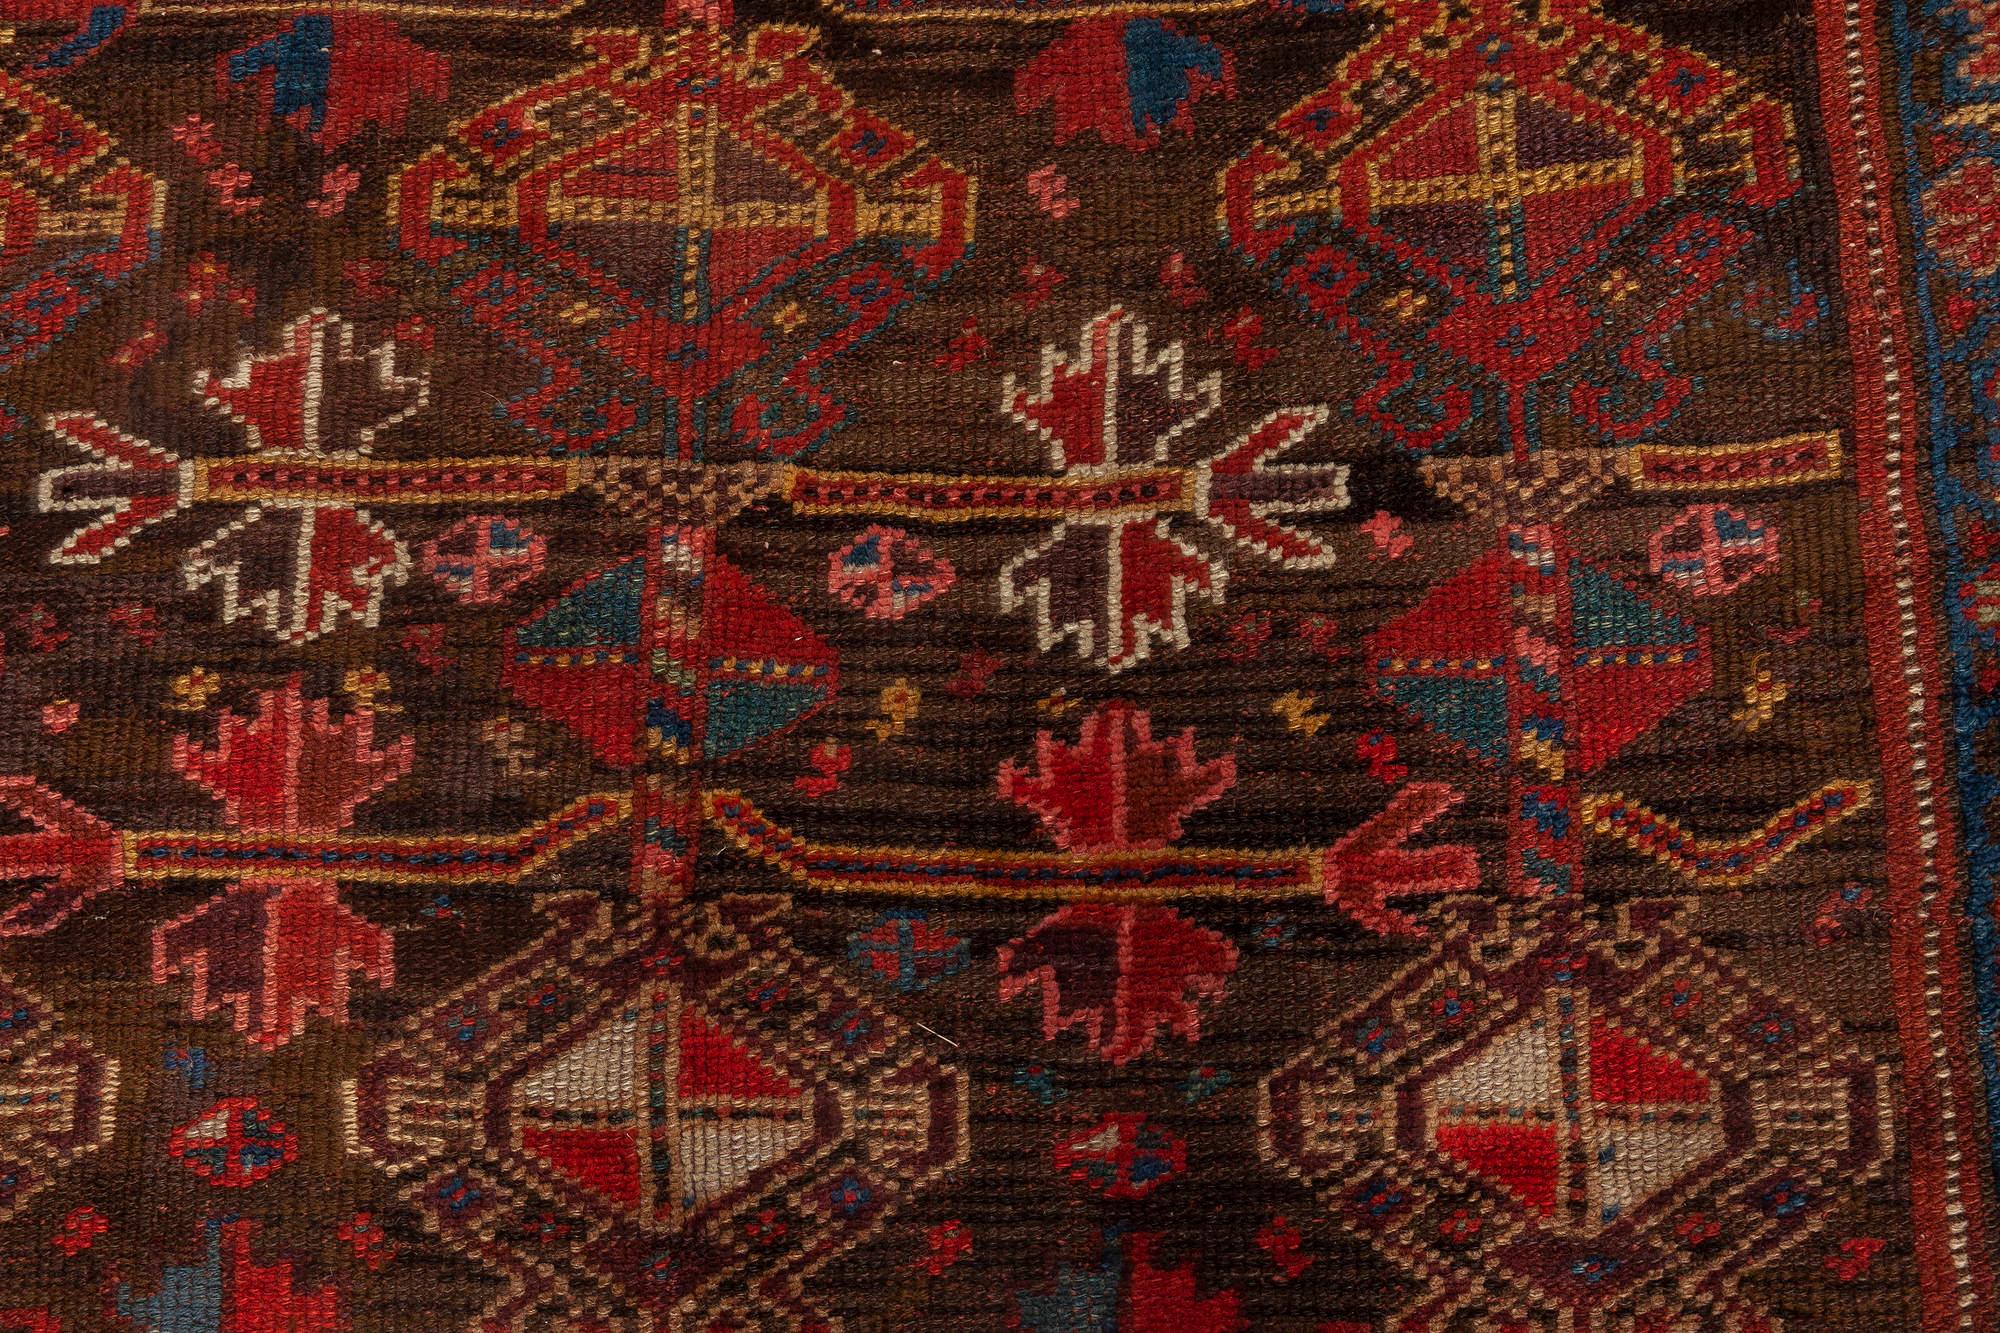 Hand-Woven 1900s Persian Malayer Geometric Handmade Wool Rug in Red, Blue, Yellow and Black